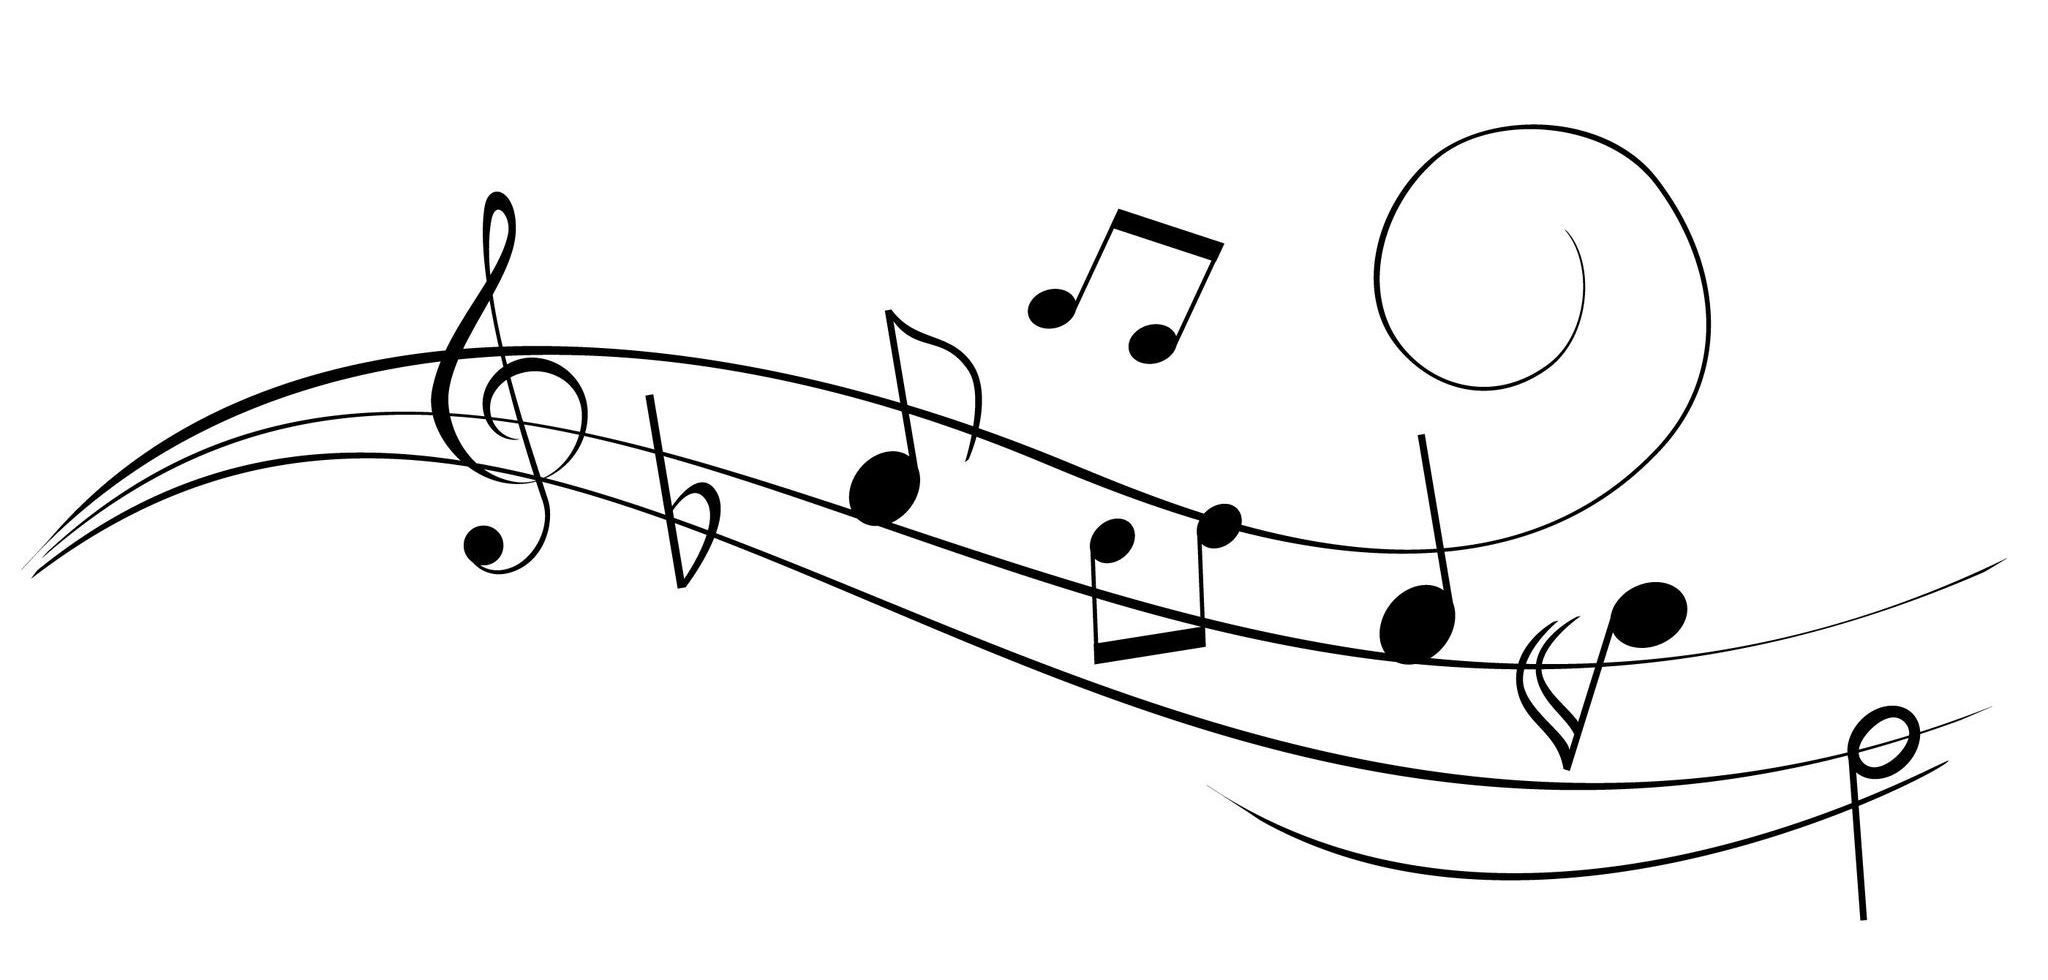 Free Music Note Drawings, Download Free Clip Art, Free Clip